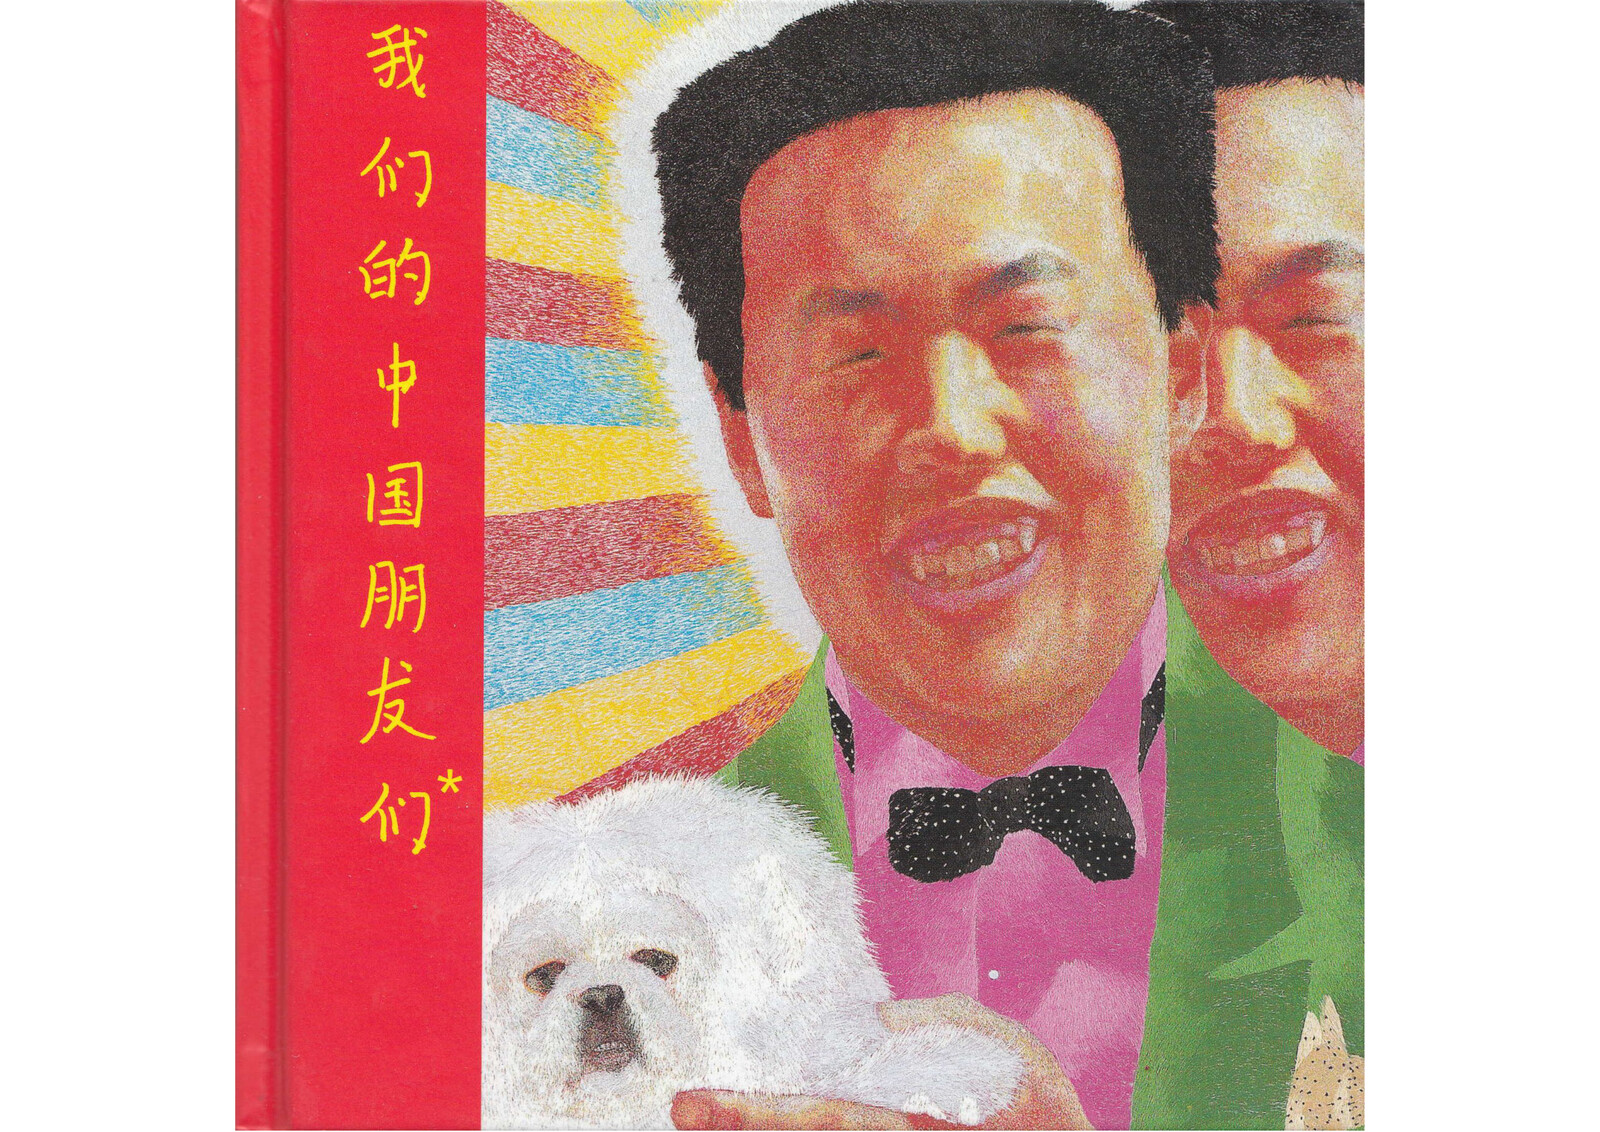 Katalog-Cover: Our Chinese Friends